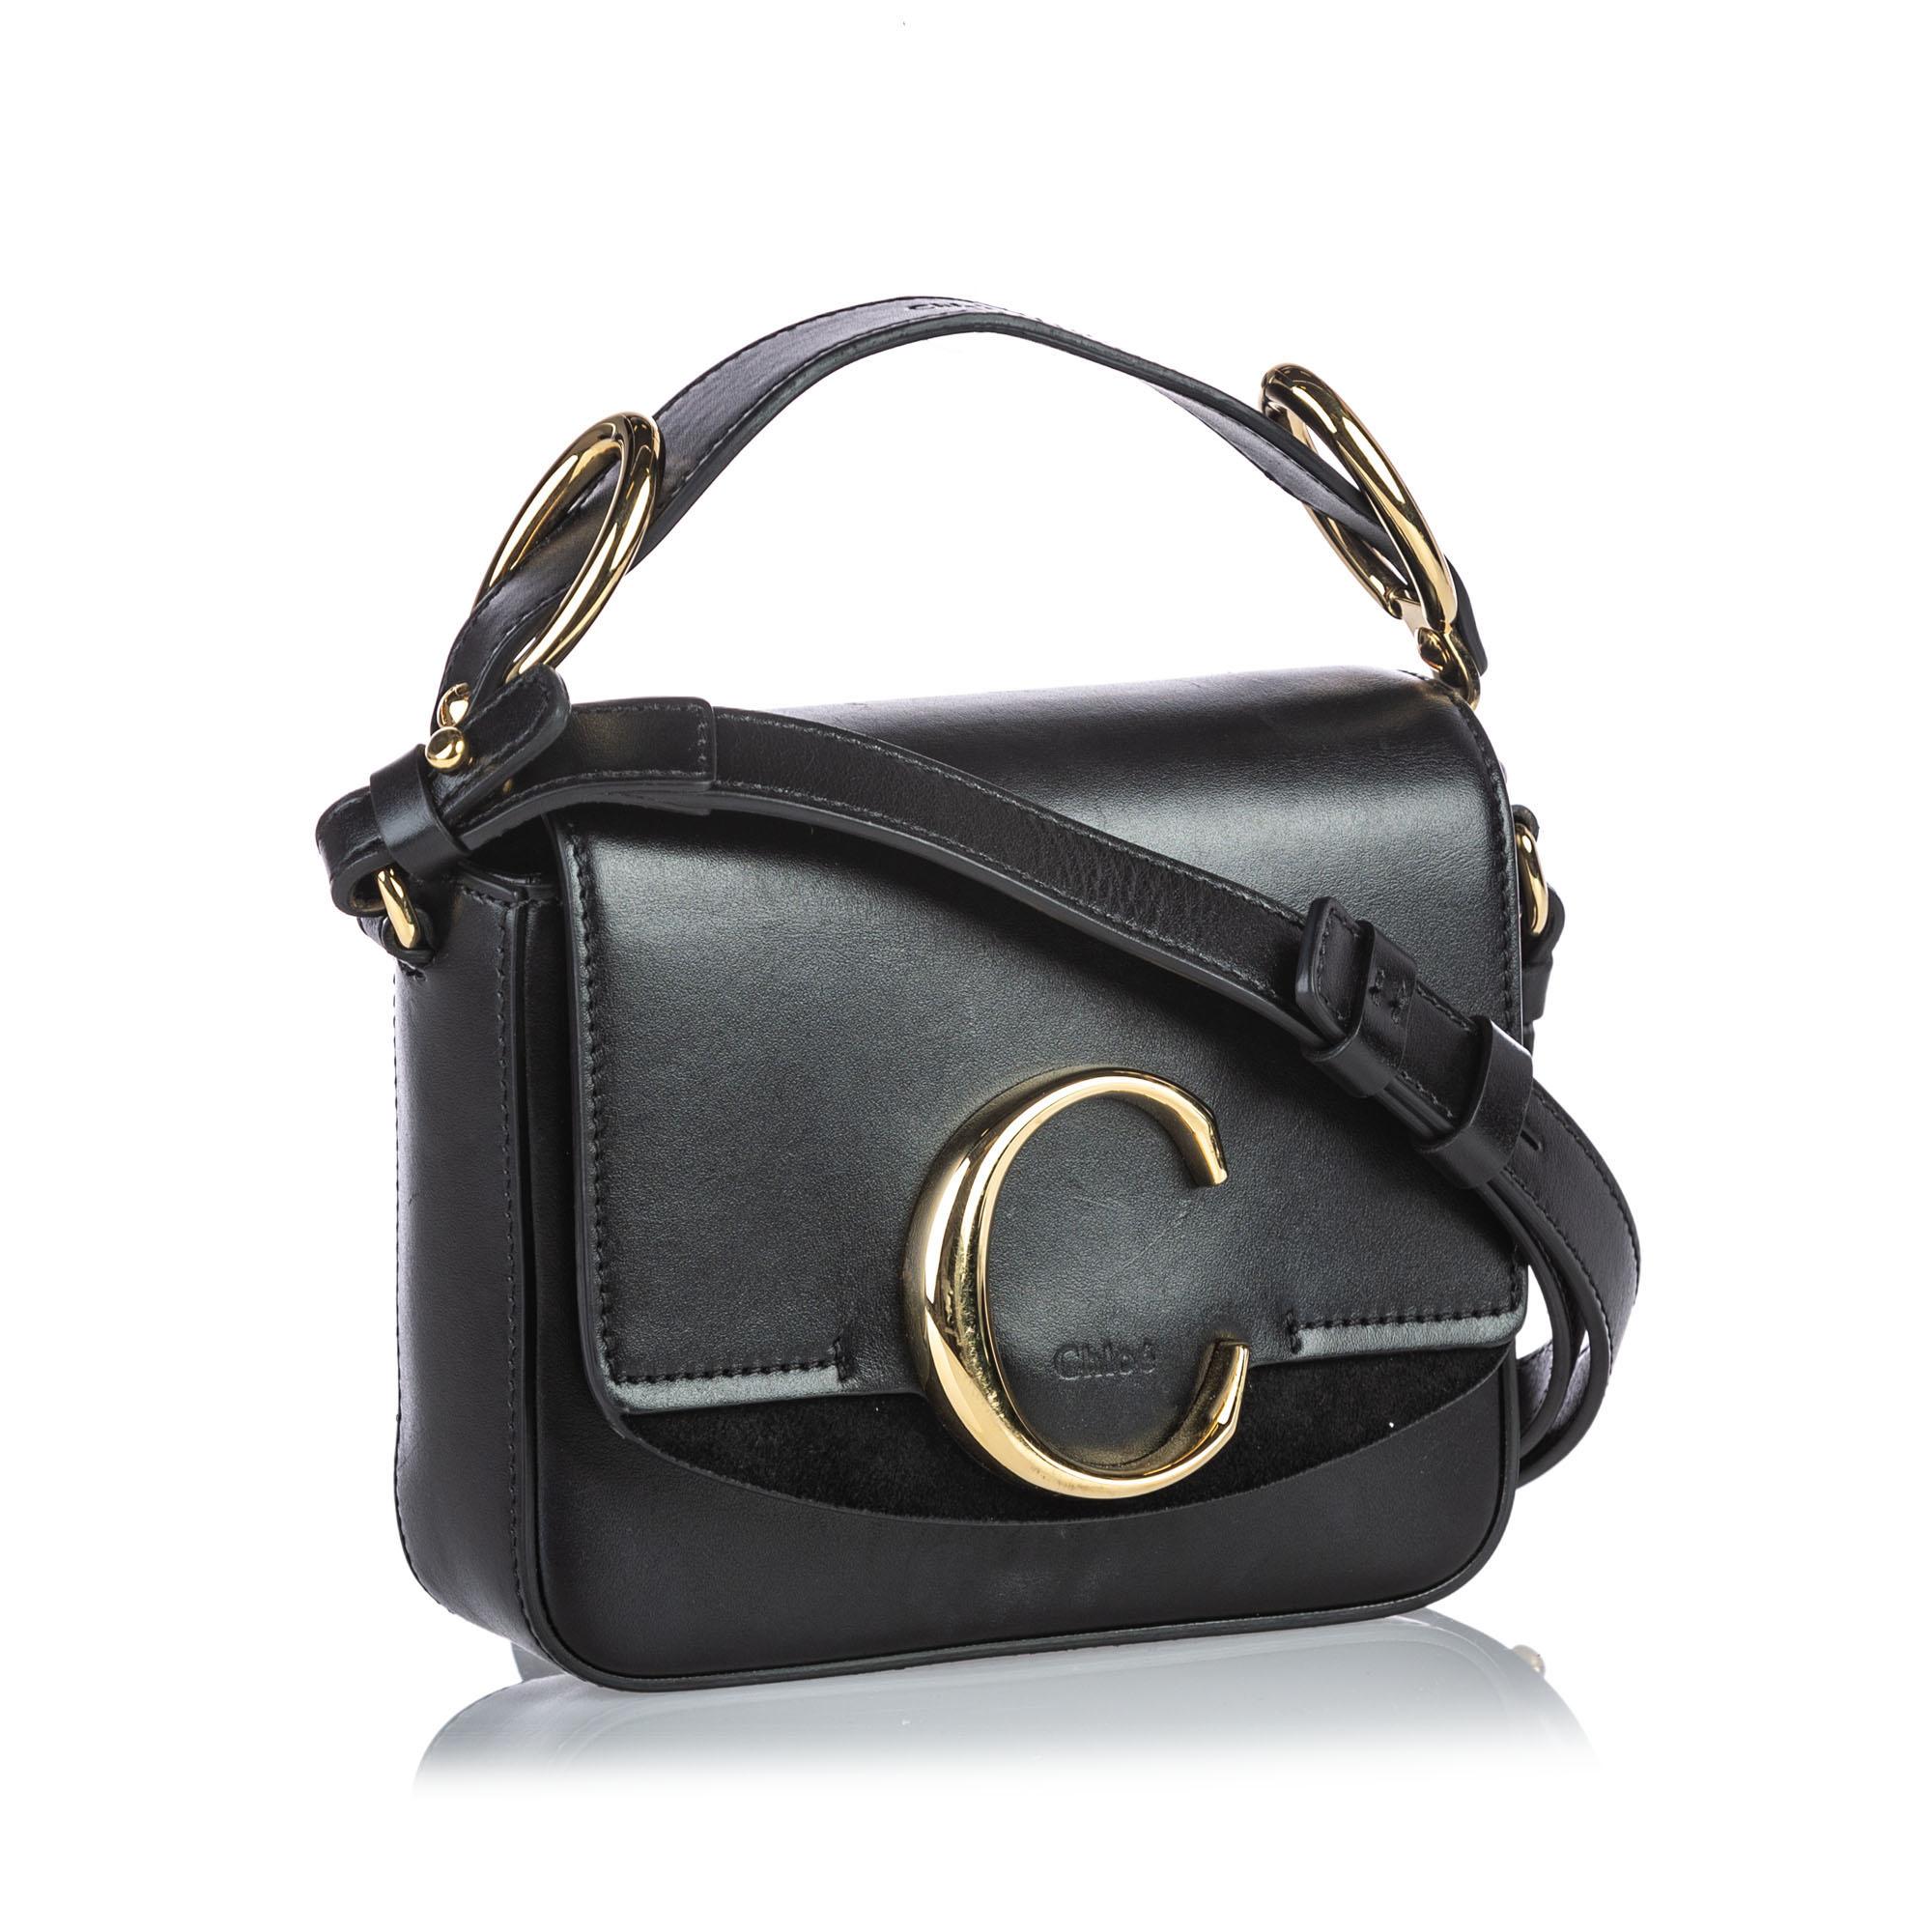 The Mini C crossbody bag features a leather body, flat leather strap, flat top handle, top flap with magnetic closure, and an interior slip pocket. It carries as B+ condition rating.

Inclusions: 
This item does not come with